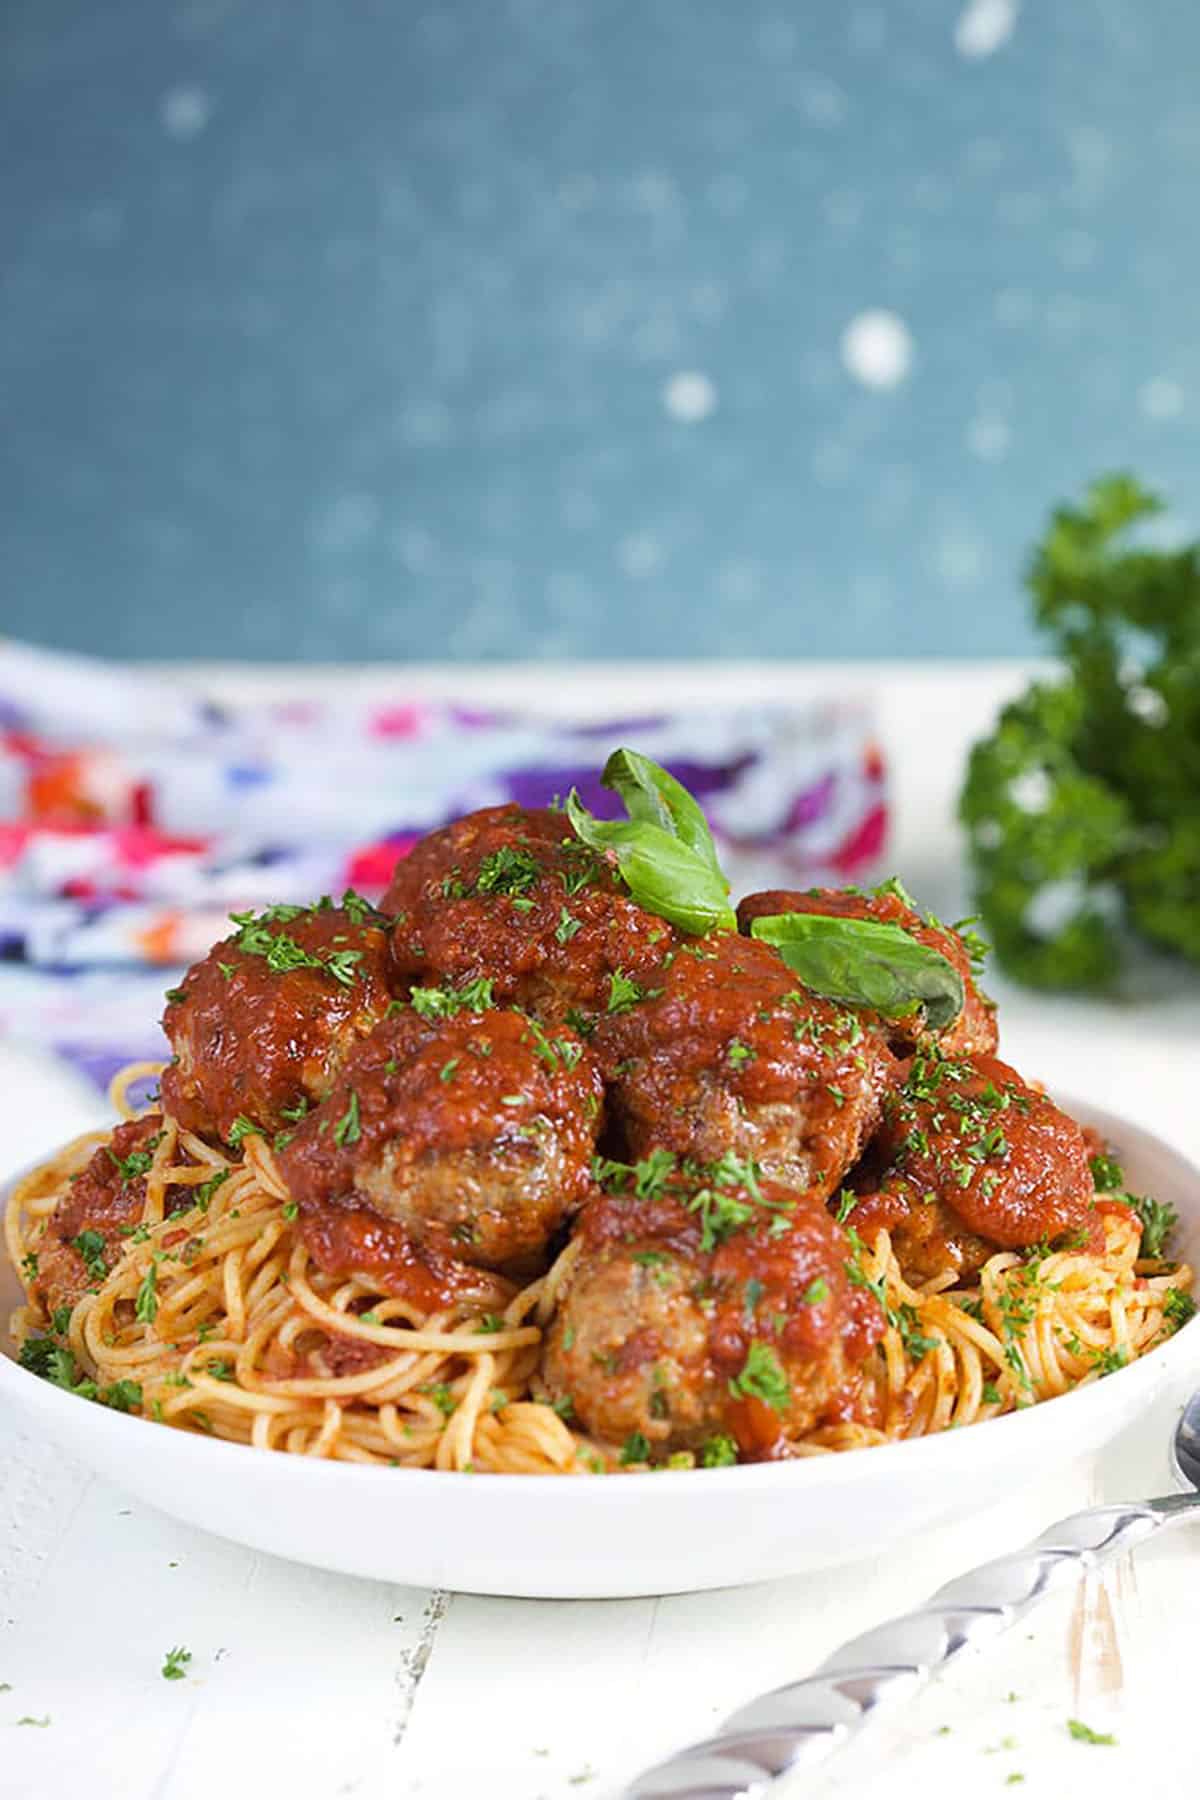 Baked meatballs on top of spaghetti in a white bowl with a blue and white background.